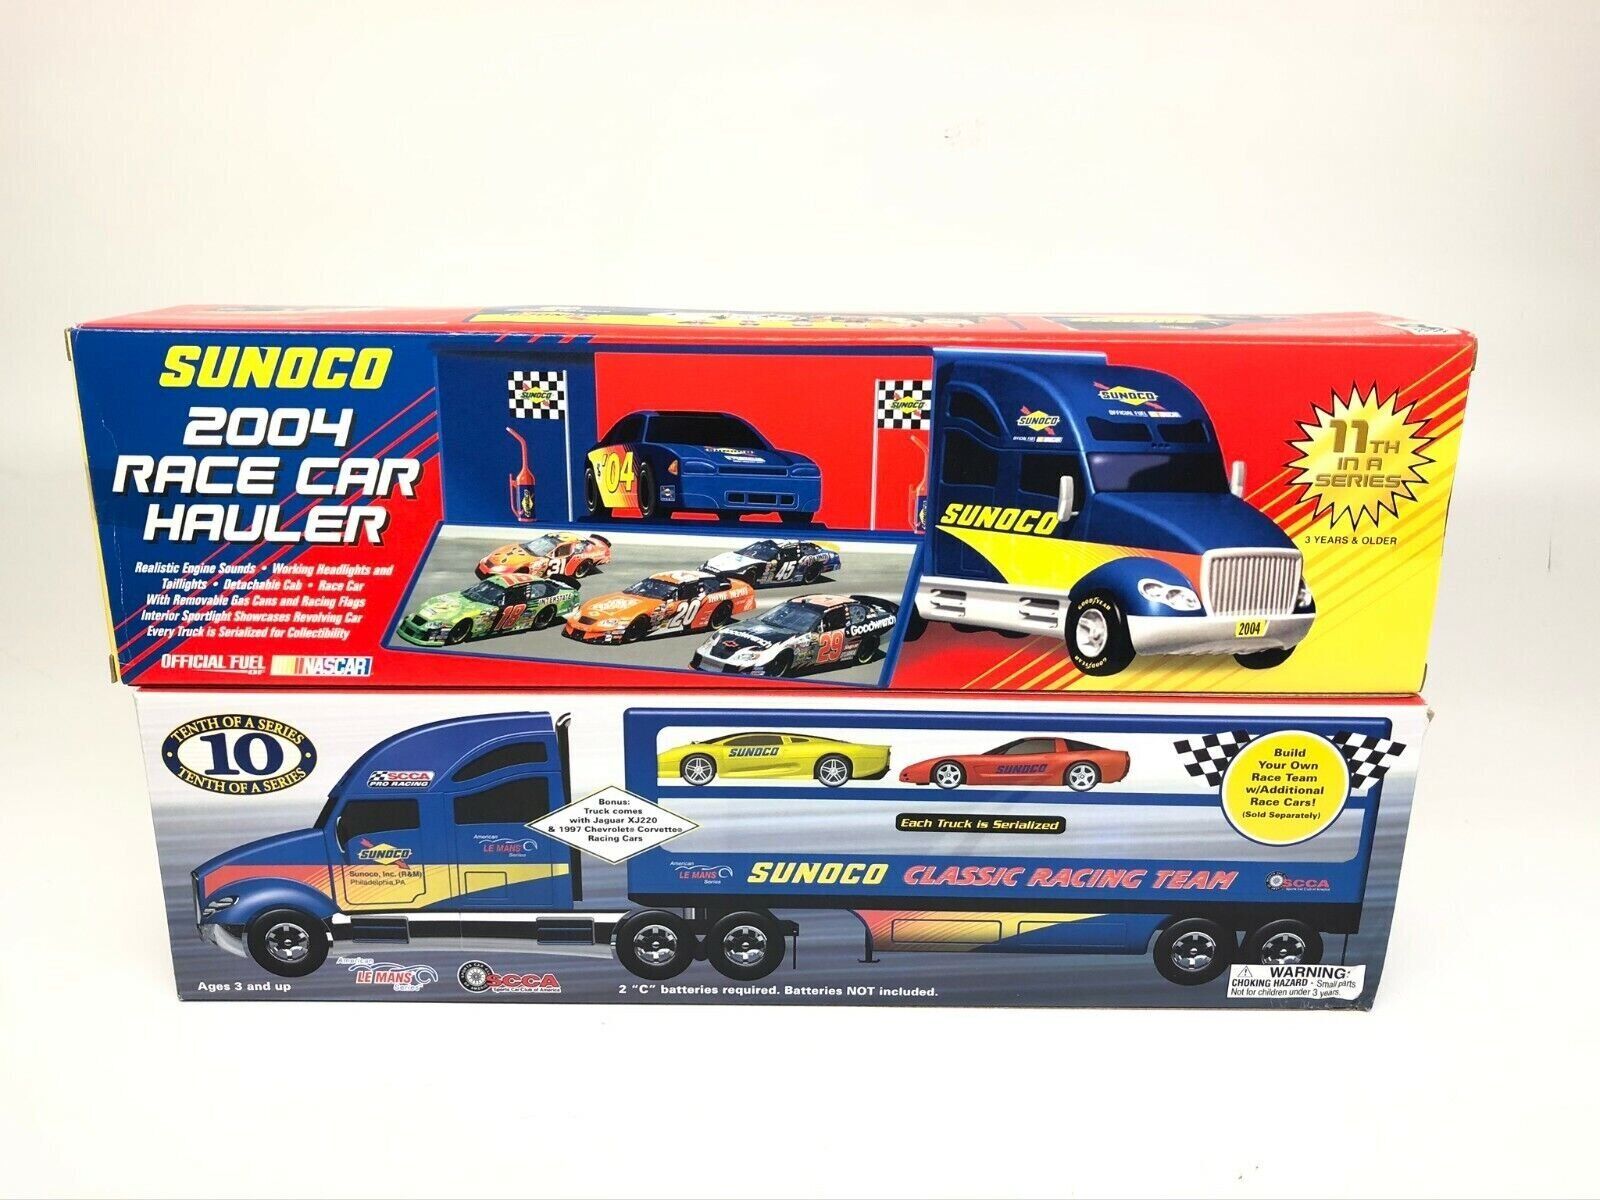 Set of 2 Sunoco Race Car Haulers 2004 and 2003 New